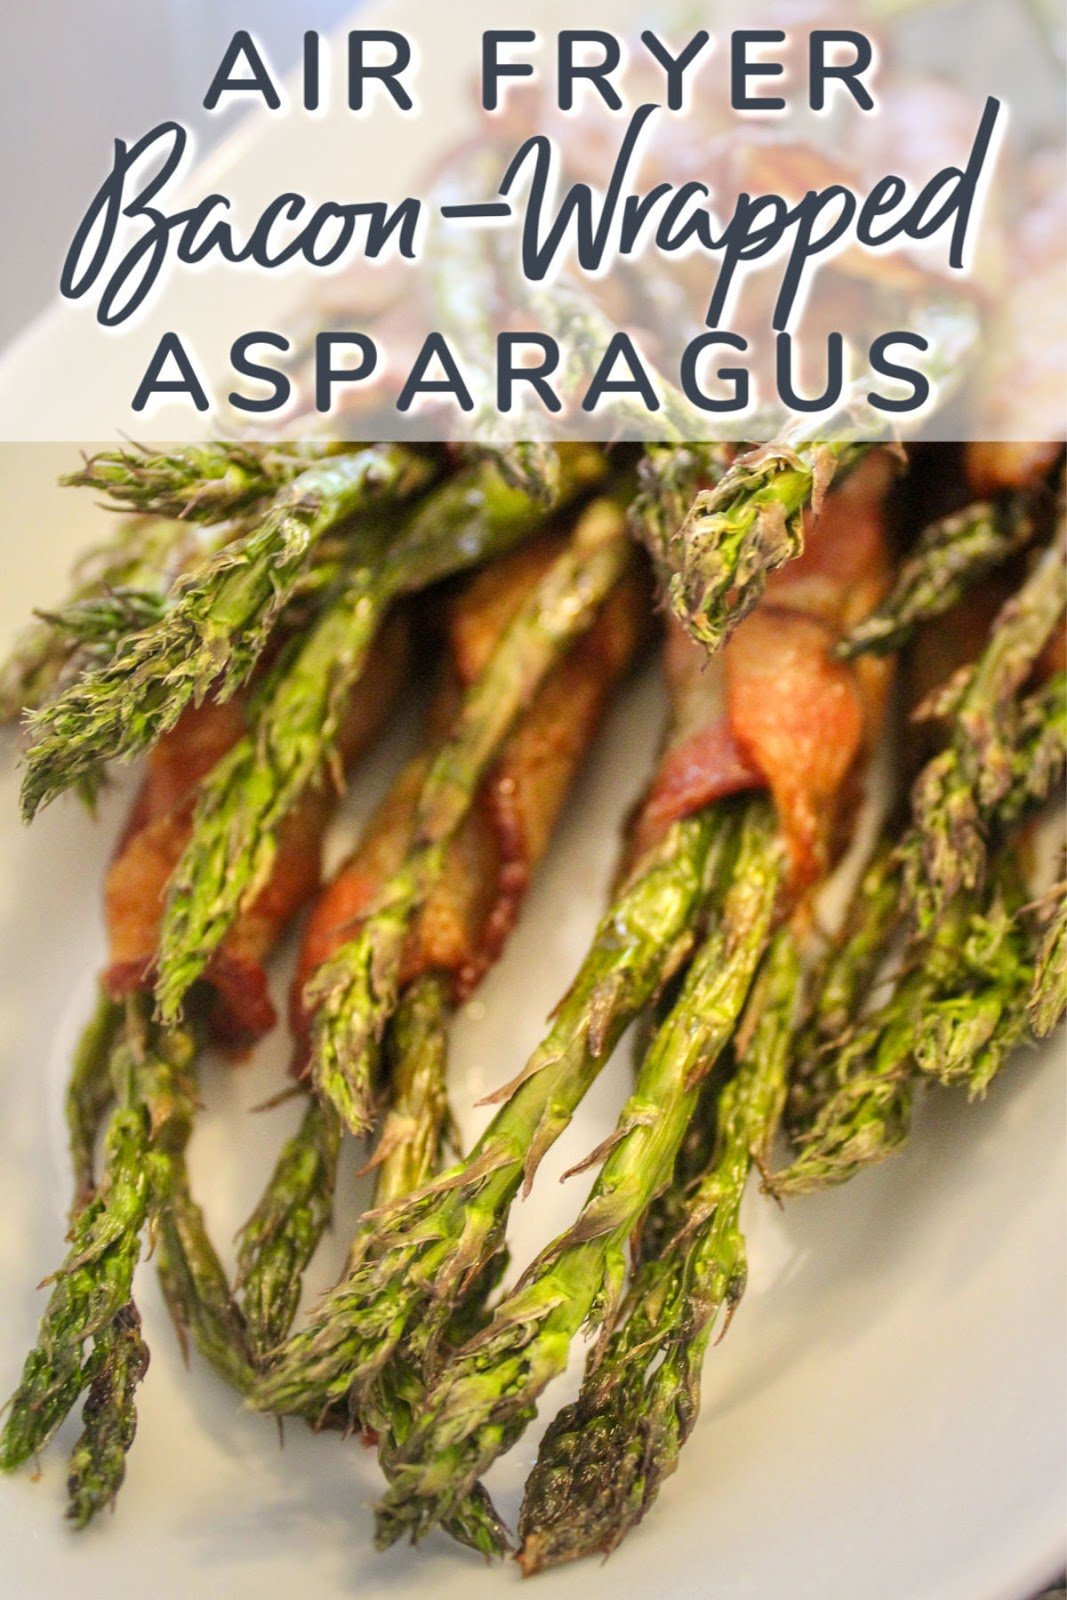 Bacon wrapped asparagus is delicious as a side dish or even a fancy appetizer – it makes it even easier when you pop it in the air fryer!
 via @foodhussy